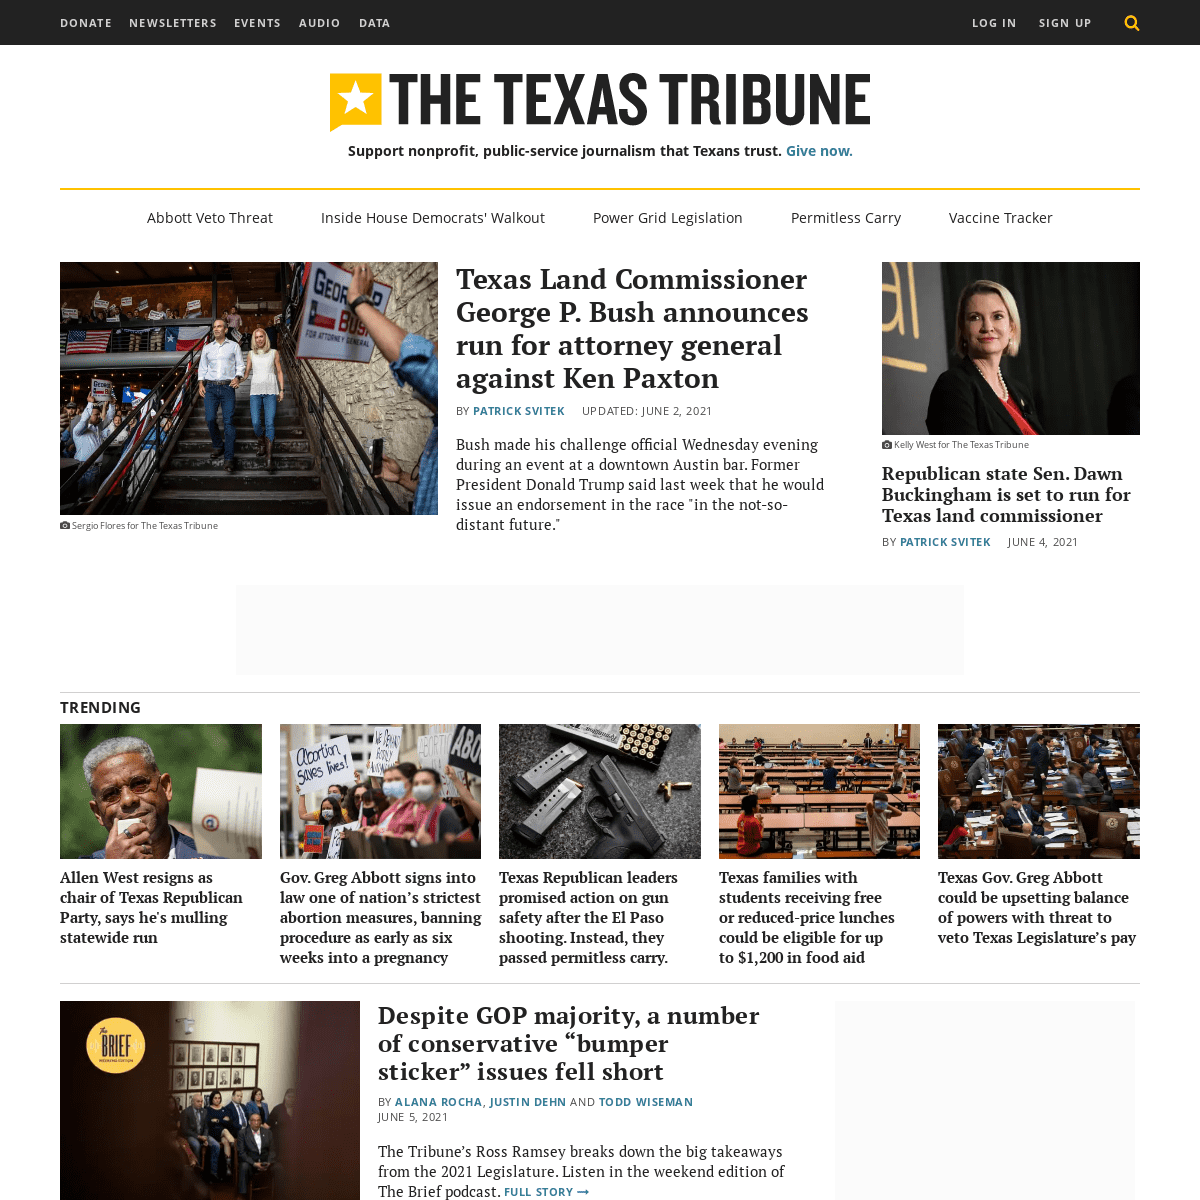 A complete backup of https://texastribune.org